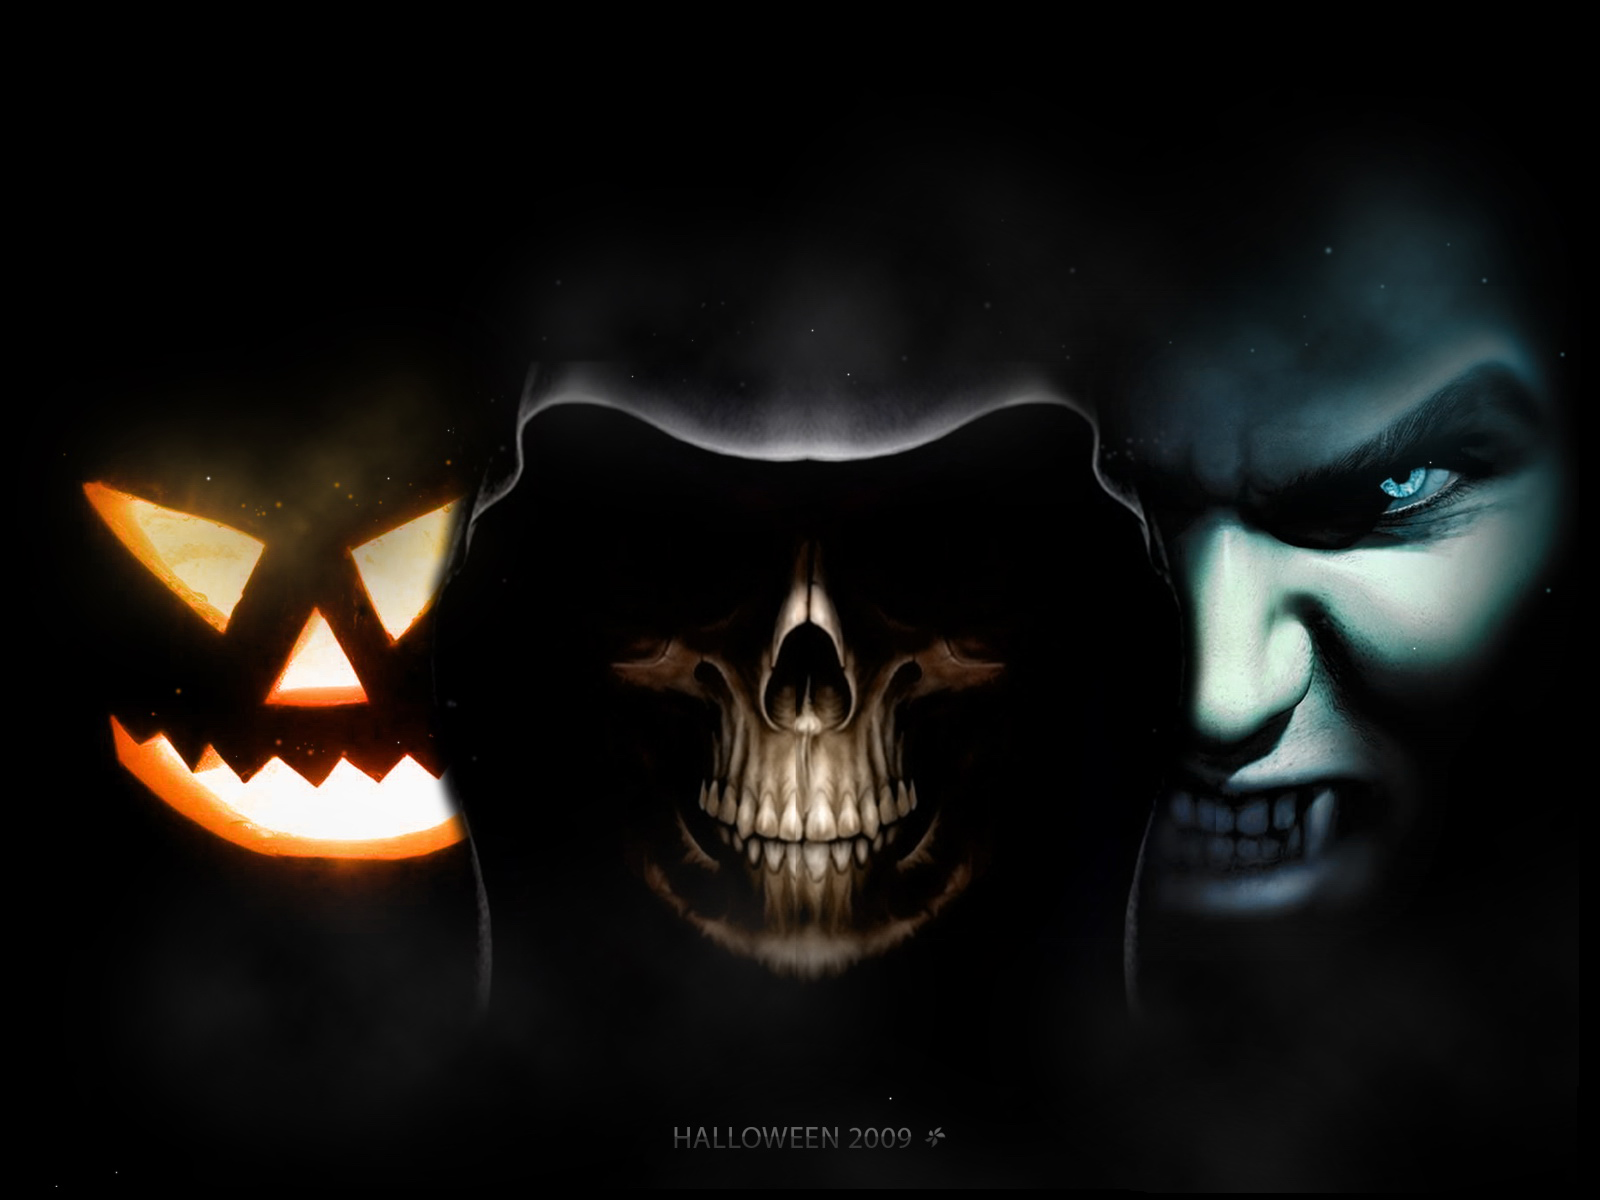 cool and funny wallpapers,skull,darkness,fiction,mouth,bone